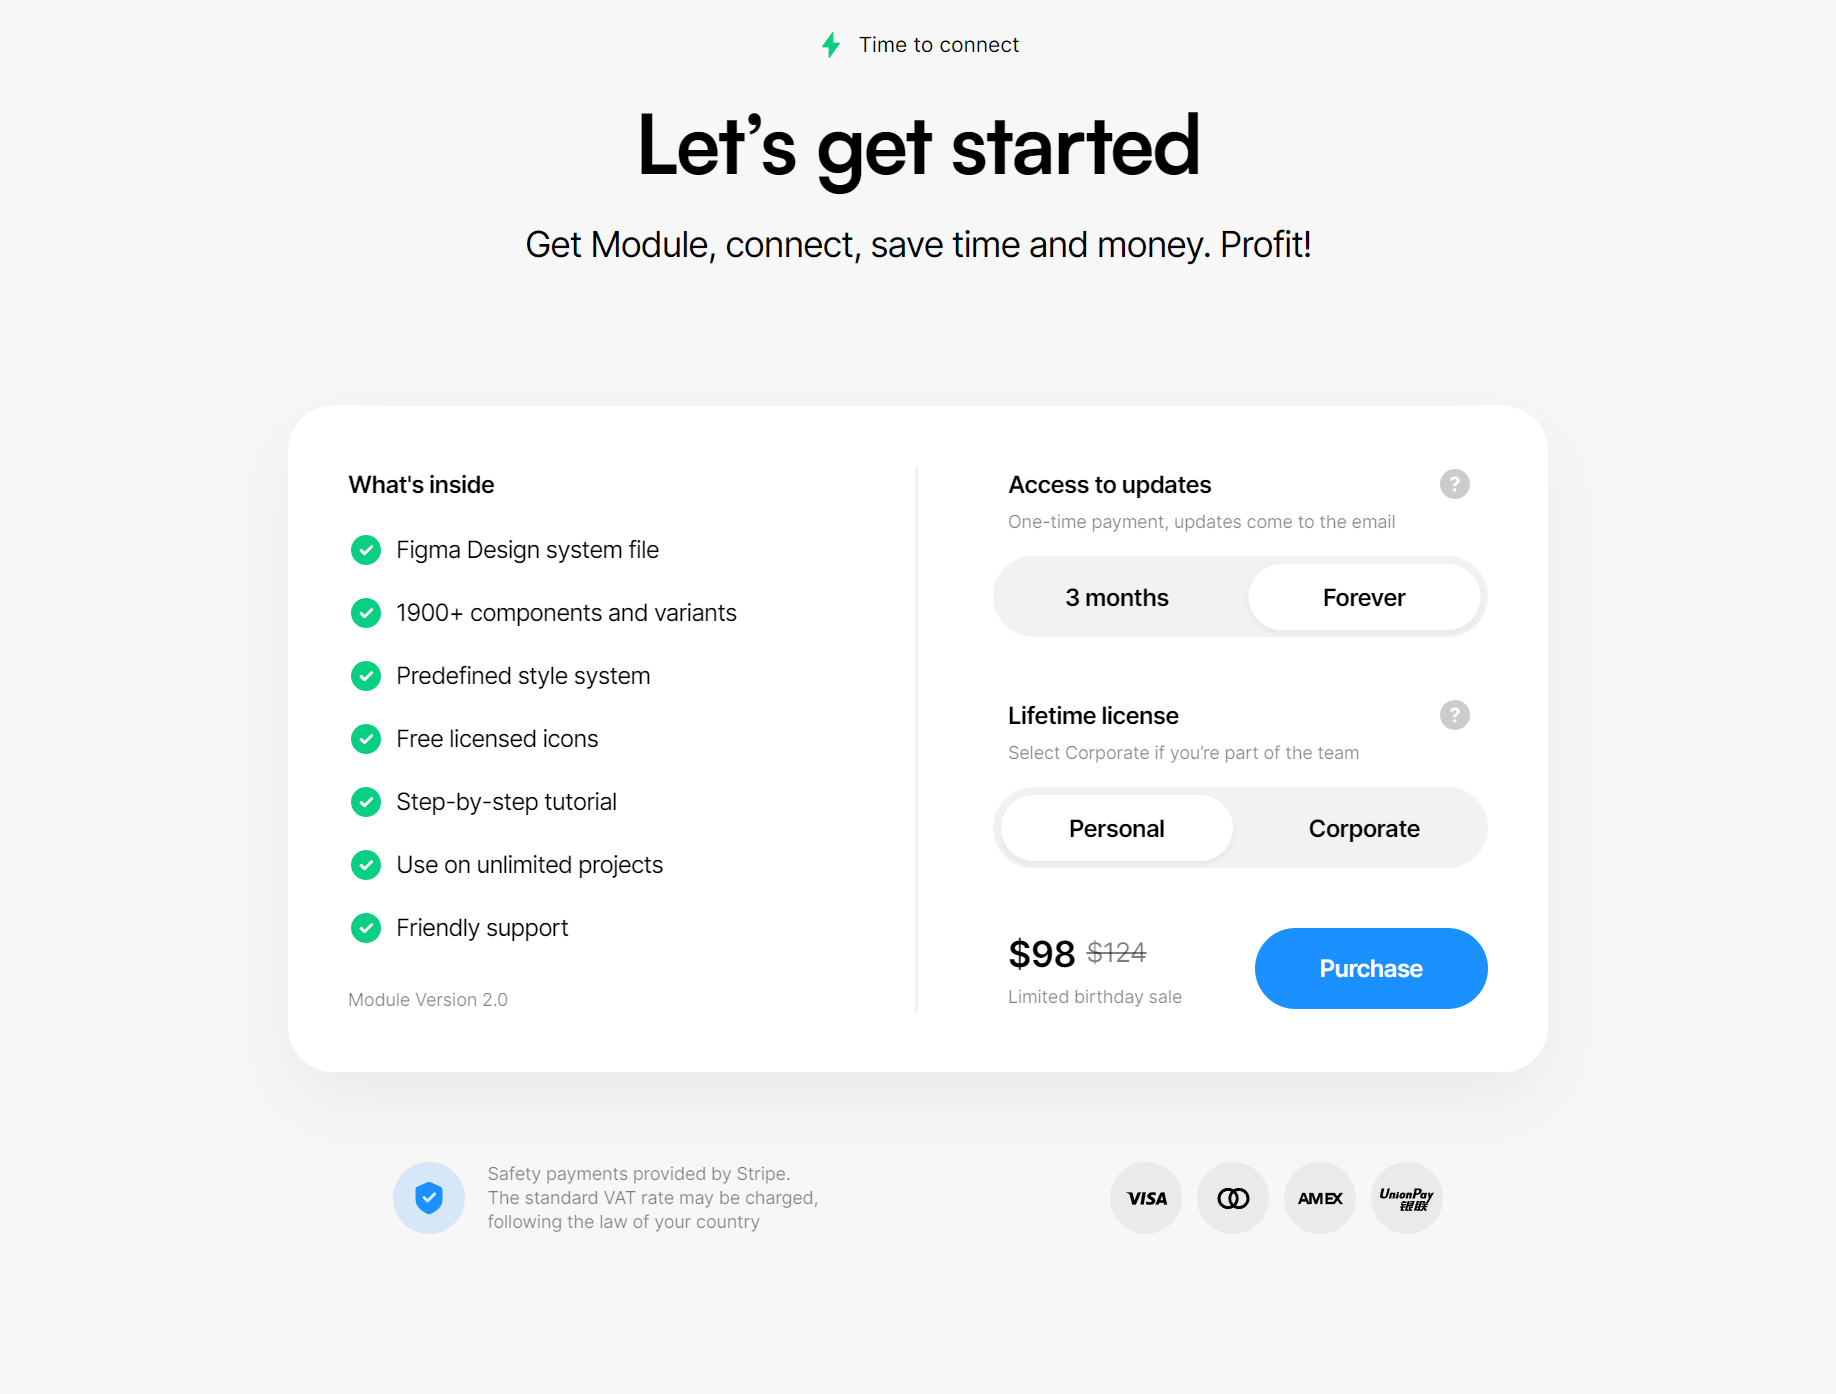 Pricing page - Module